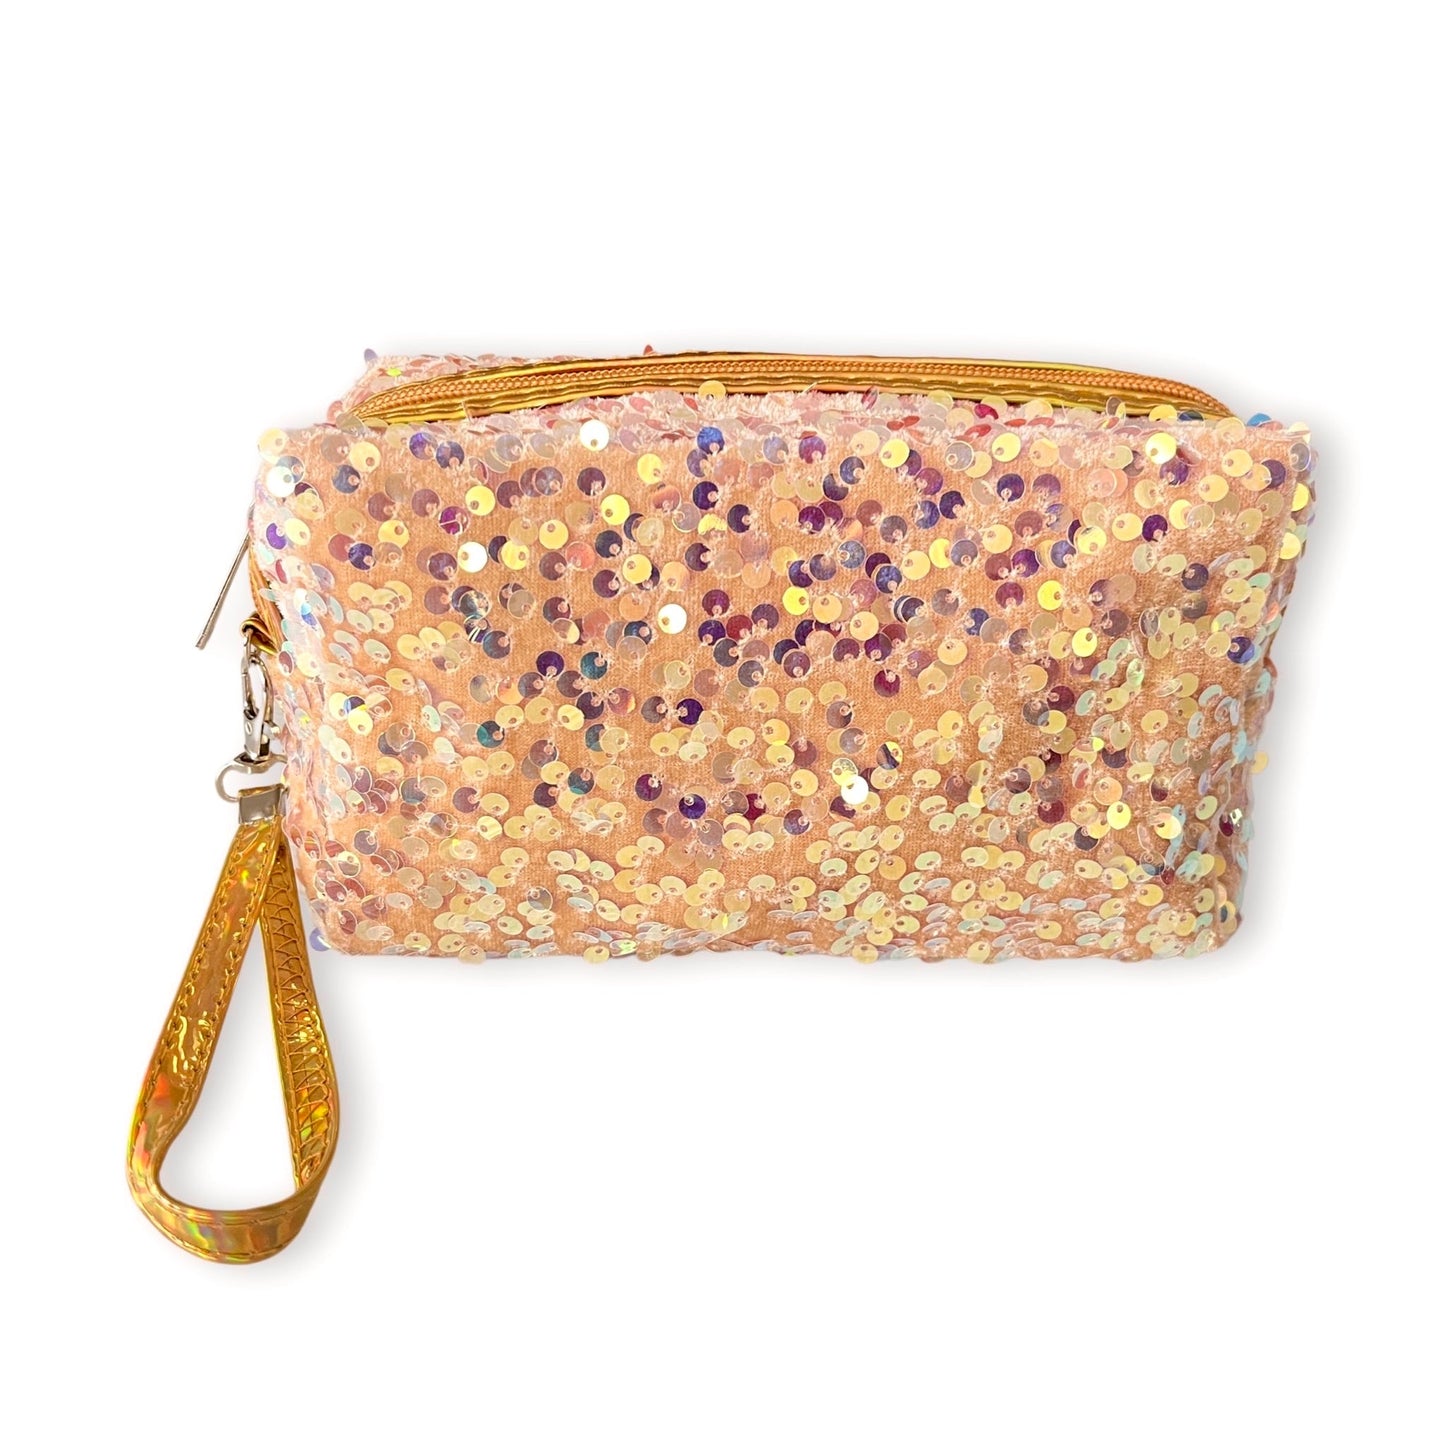 Bring on the Day Sequins Bag in Gold